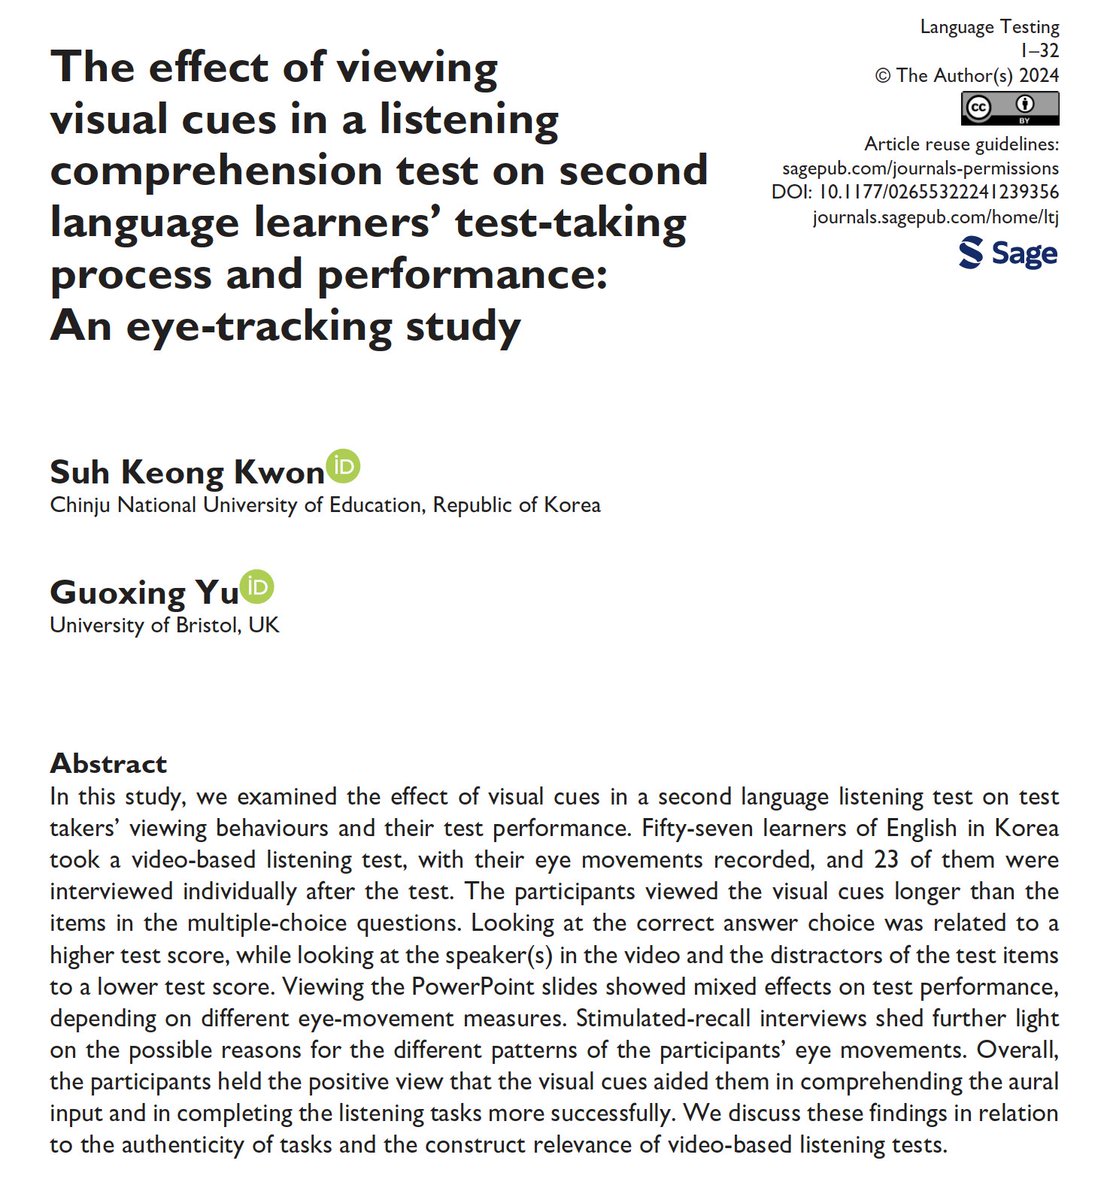 Now available in Online First, Suh Keong Kwon (Chinju National University of Education, Republic of Korea) and Guoxing Yu (@SOEBristol) investigate the effects of visual cues in a video-based listening test on the performance of English learners in Korea. journals.sagepub.com/doi/full/10.11…